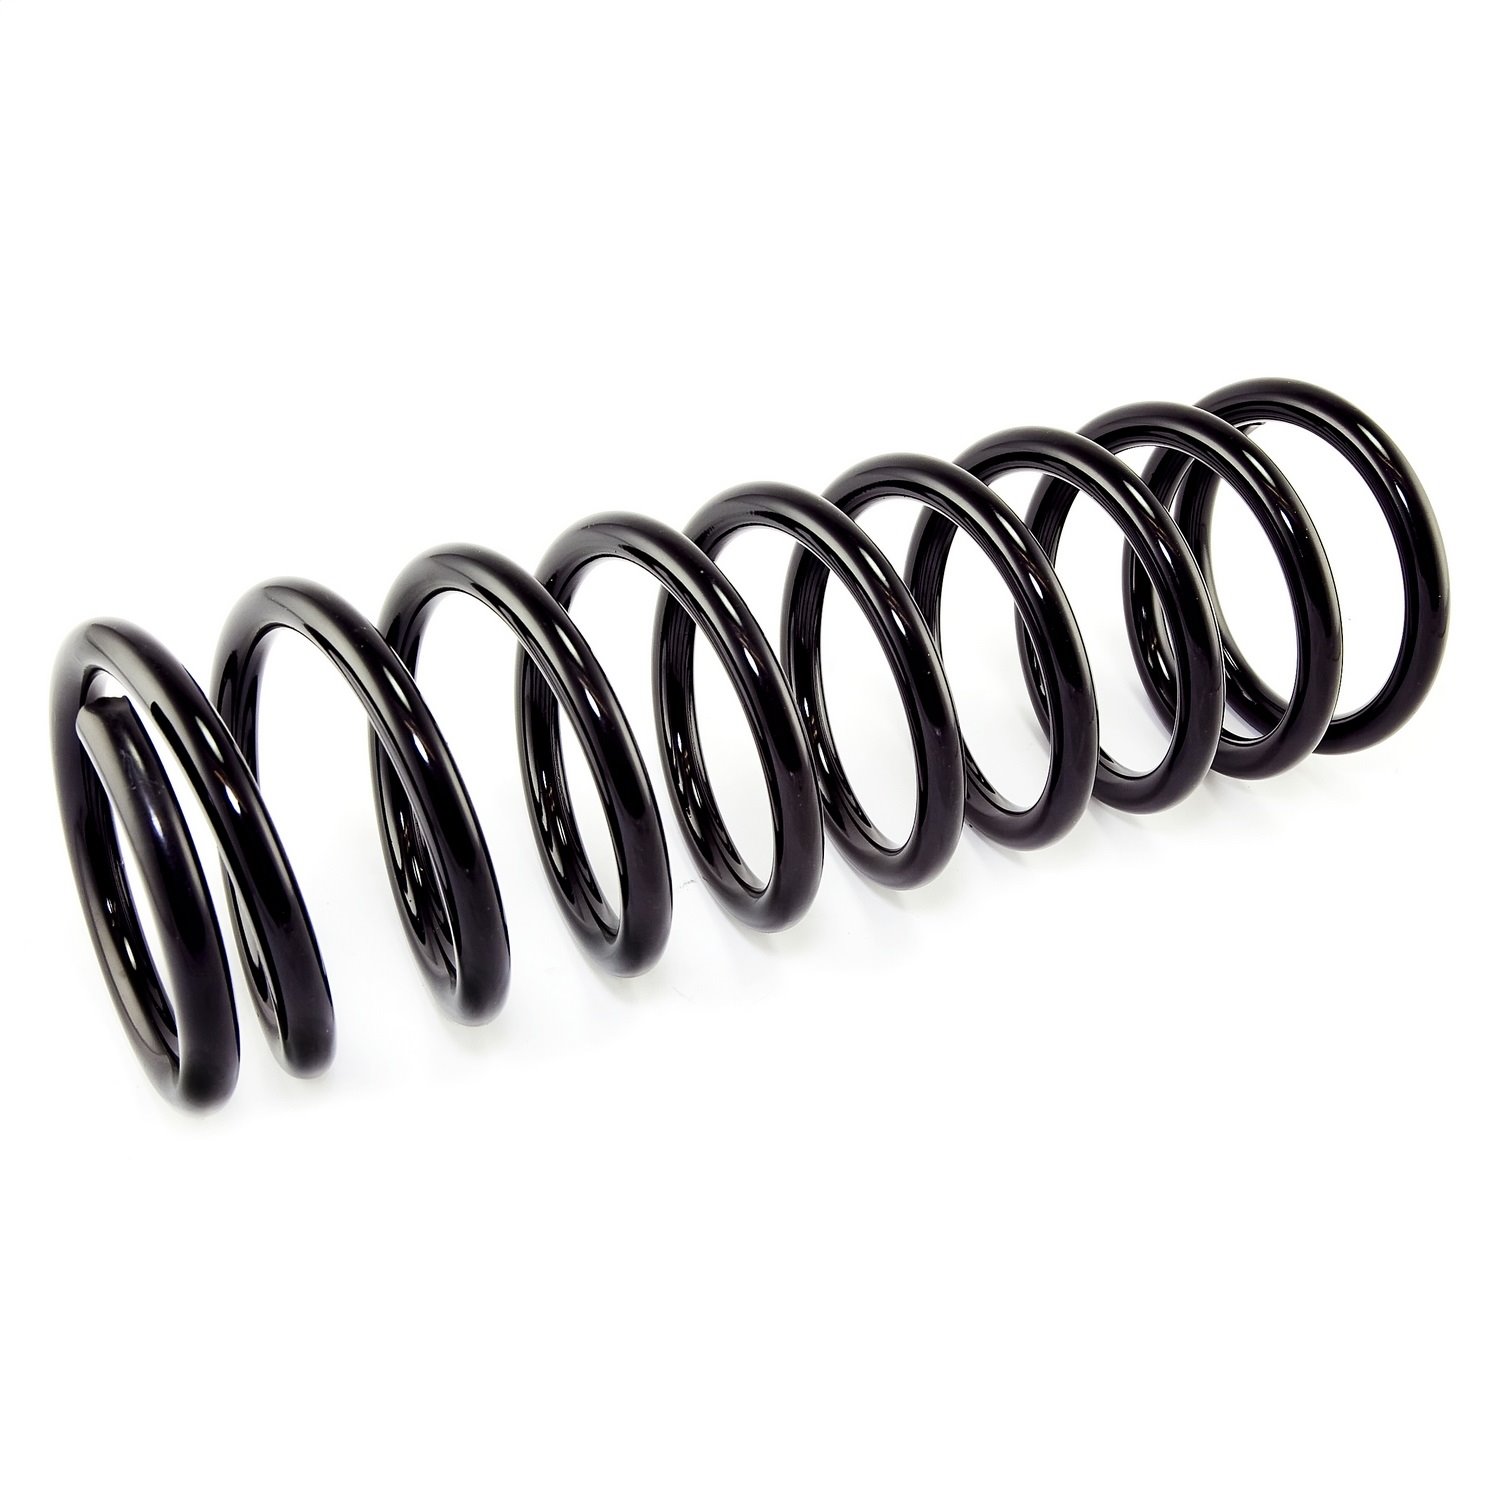 Stock replacement front coil spring from Omix-ADA, Fits 99-04 Jeep Grand Cherokee WJ